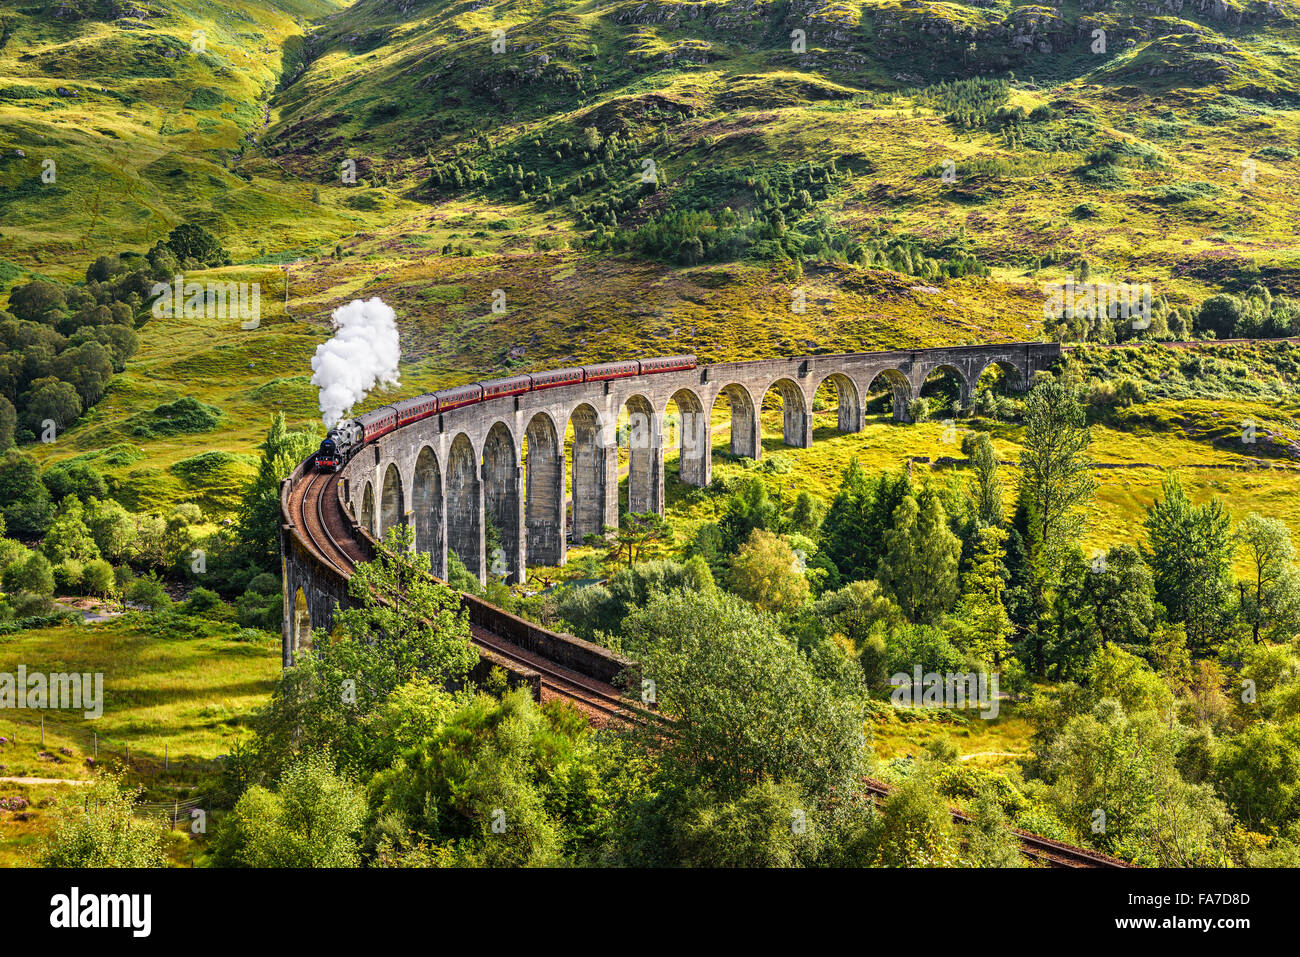 Glenfinnan Railway Viaduct in Scotland with the Jacobite steam train passing over Stock Photo